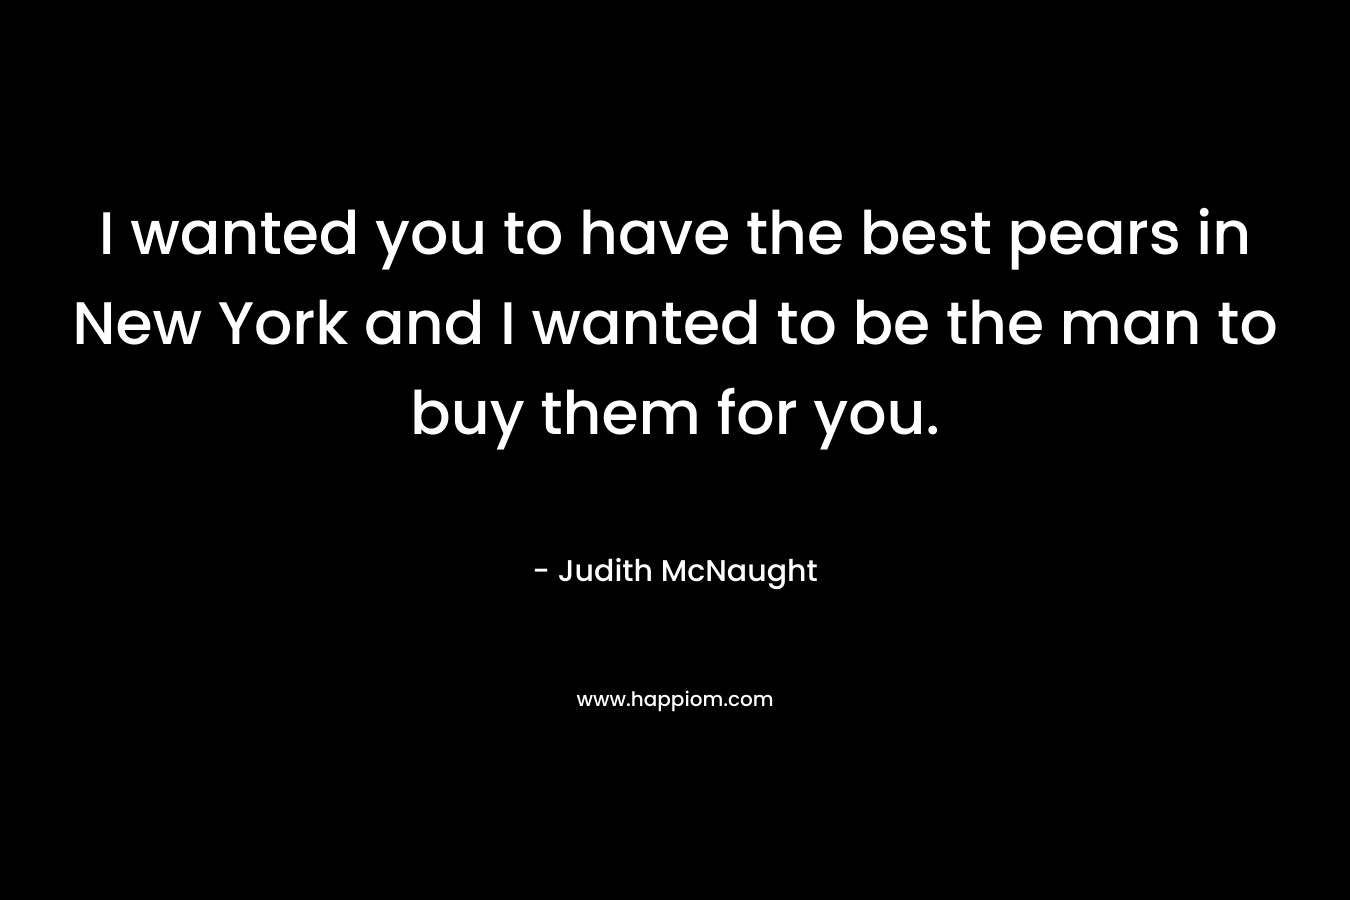 I wanted you to have the best pears in New York and I wanted to be the man to buy them for you. – Judith McNaught